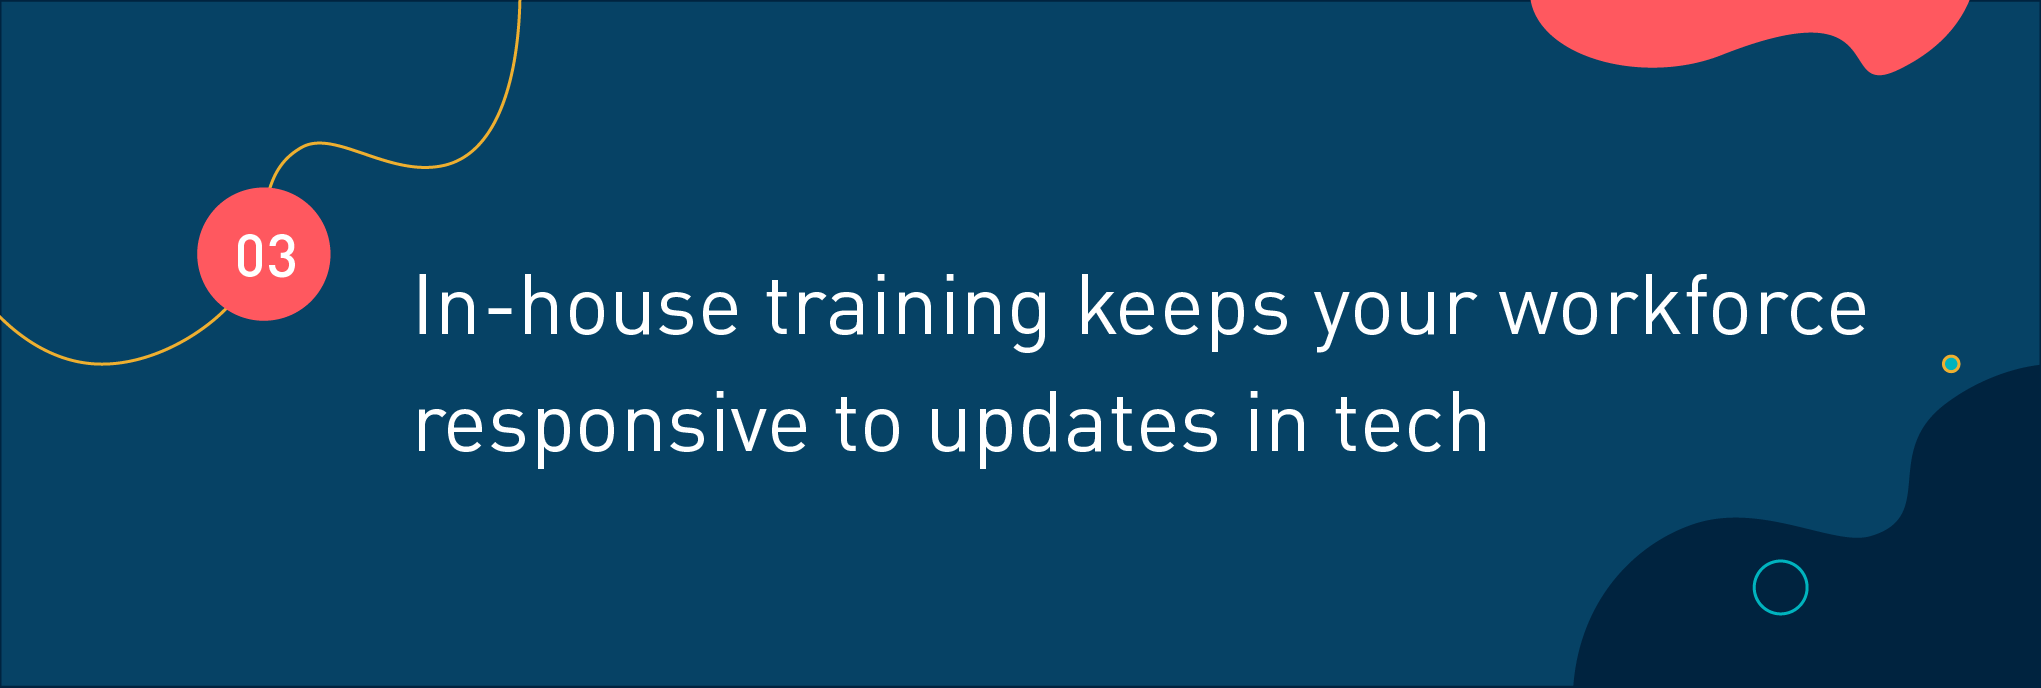 In-house training keeps your workforce responsive to updates in tech